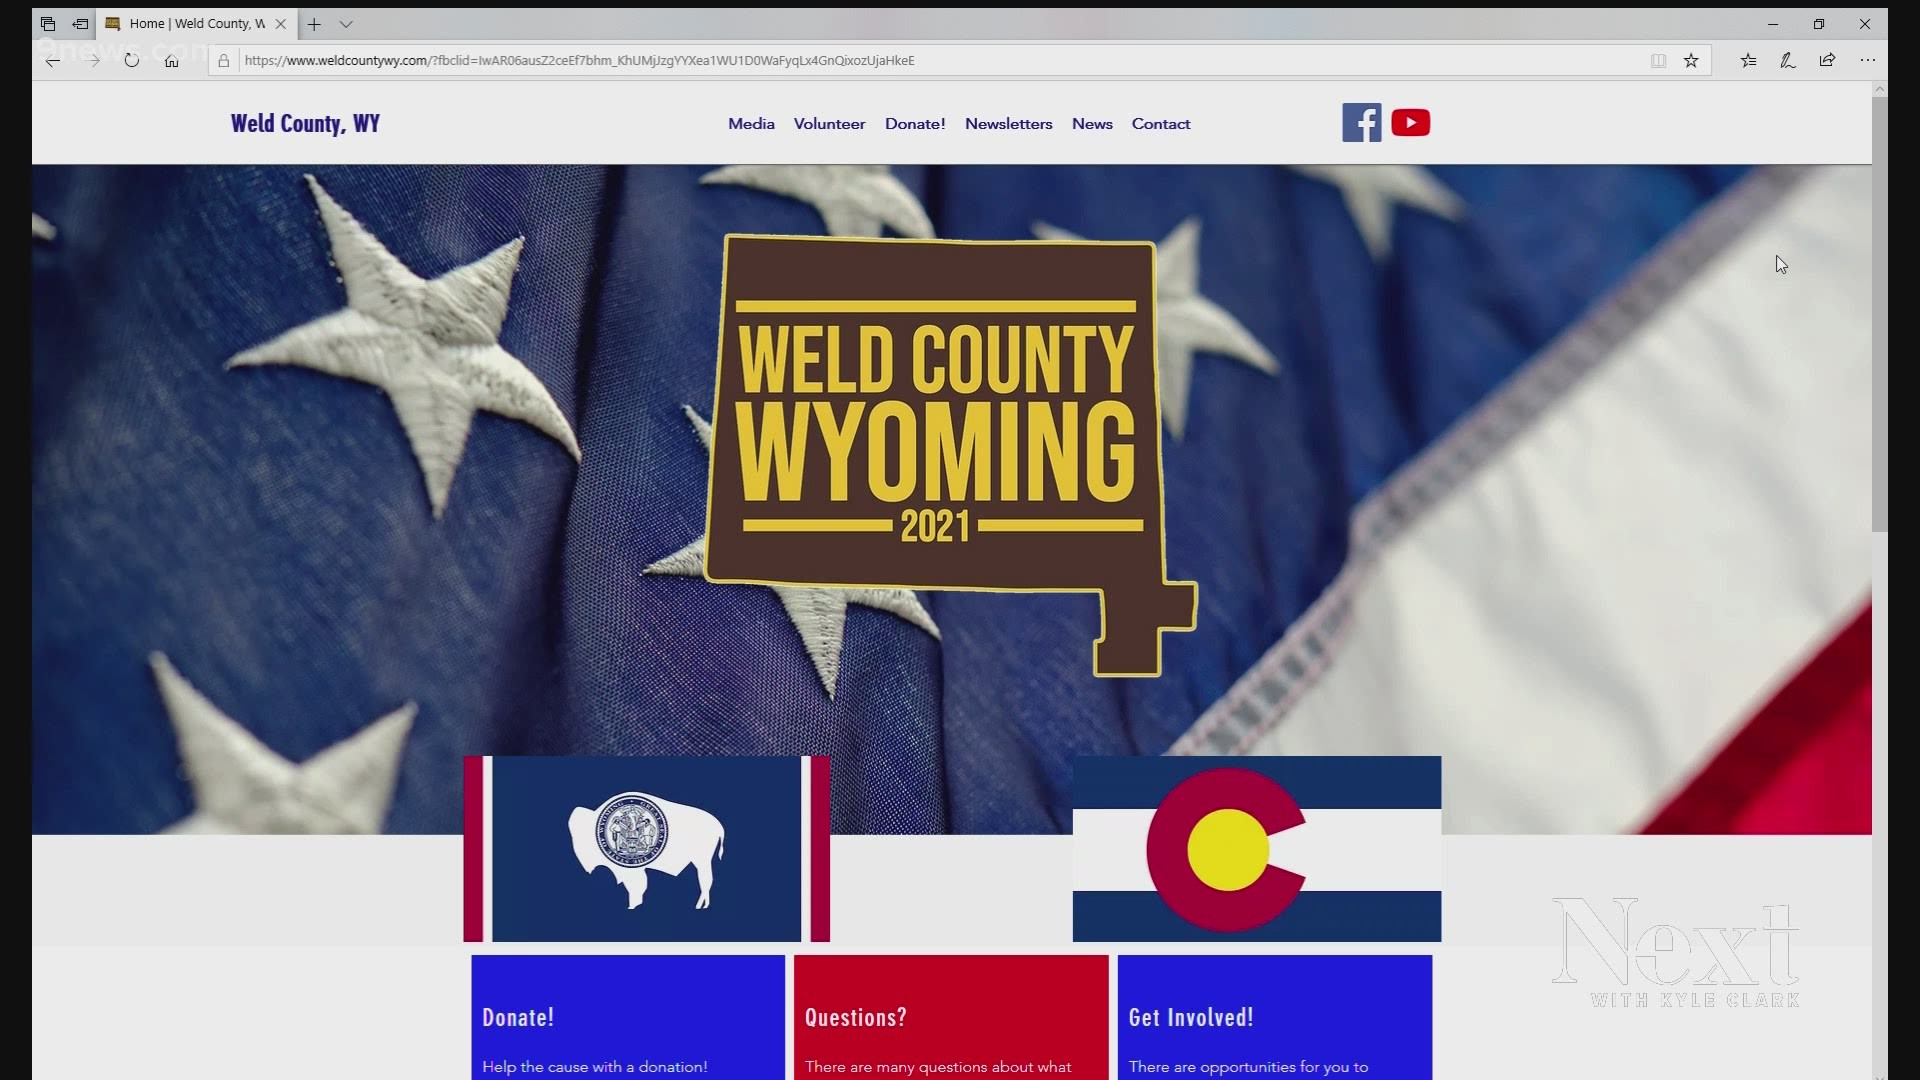 The conservative group trying to turn Weld County into part of Wyoming will need to change Colorado's constitution to make it happen.